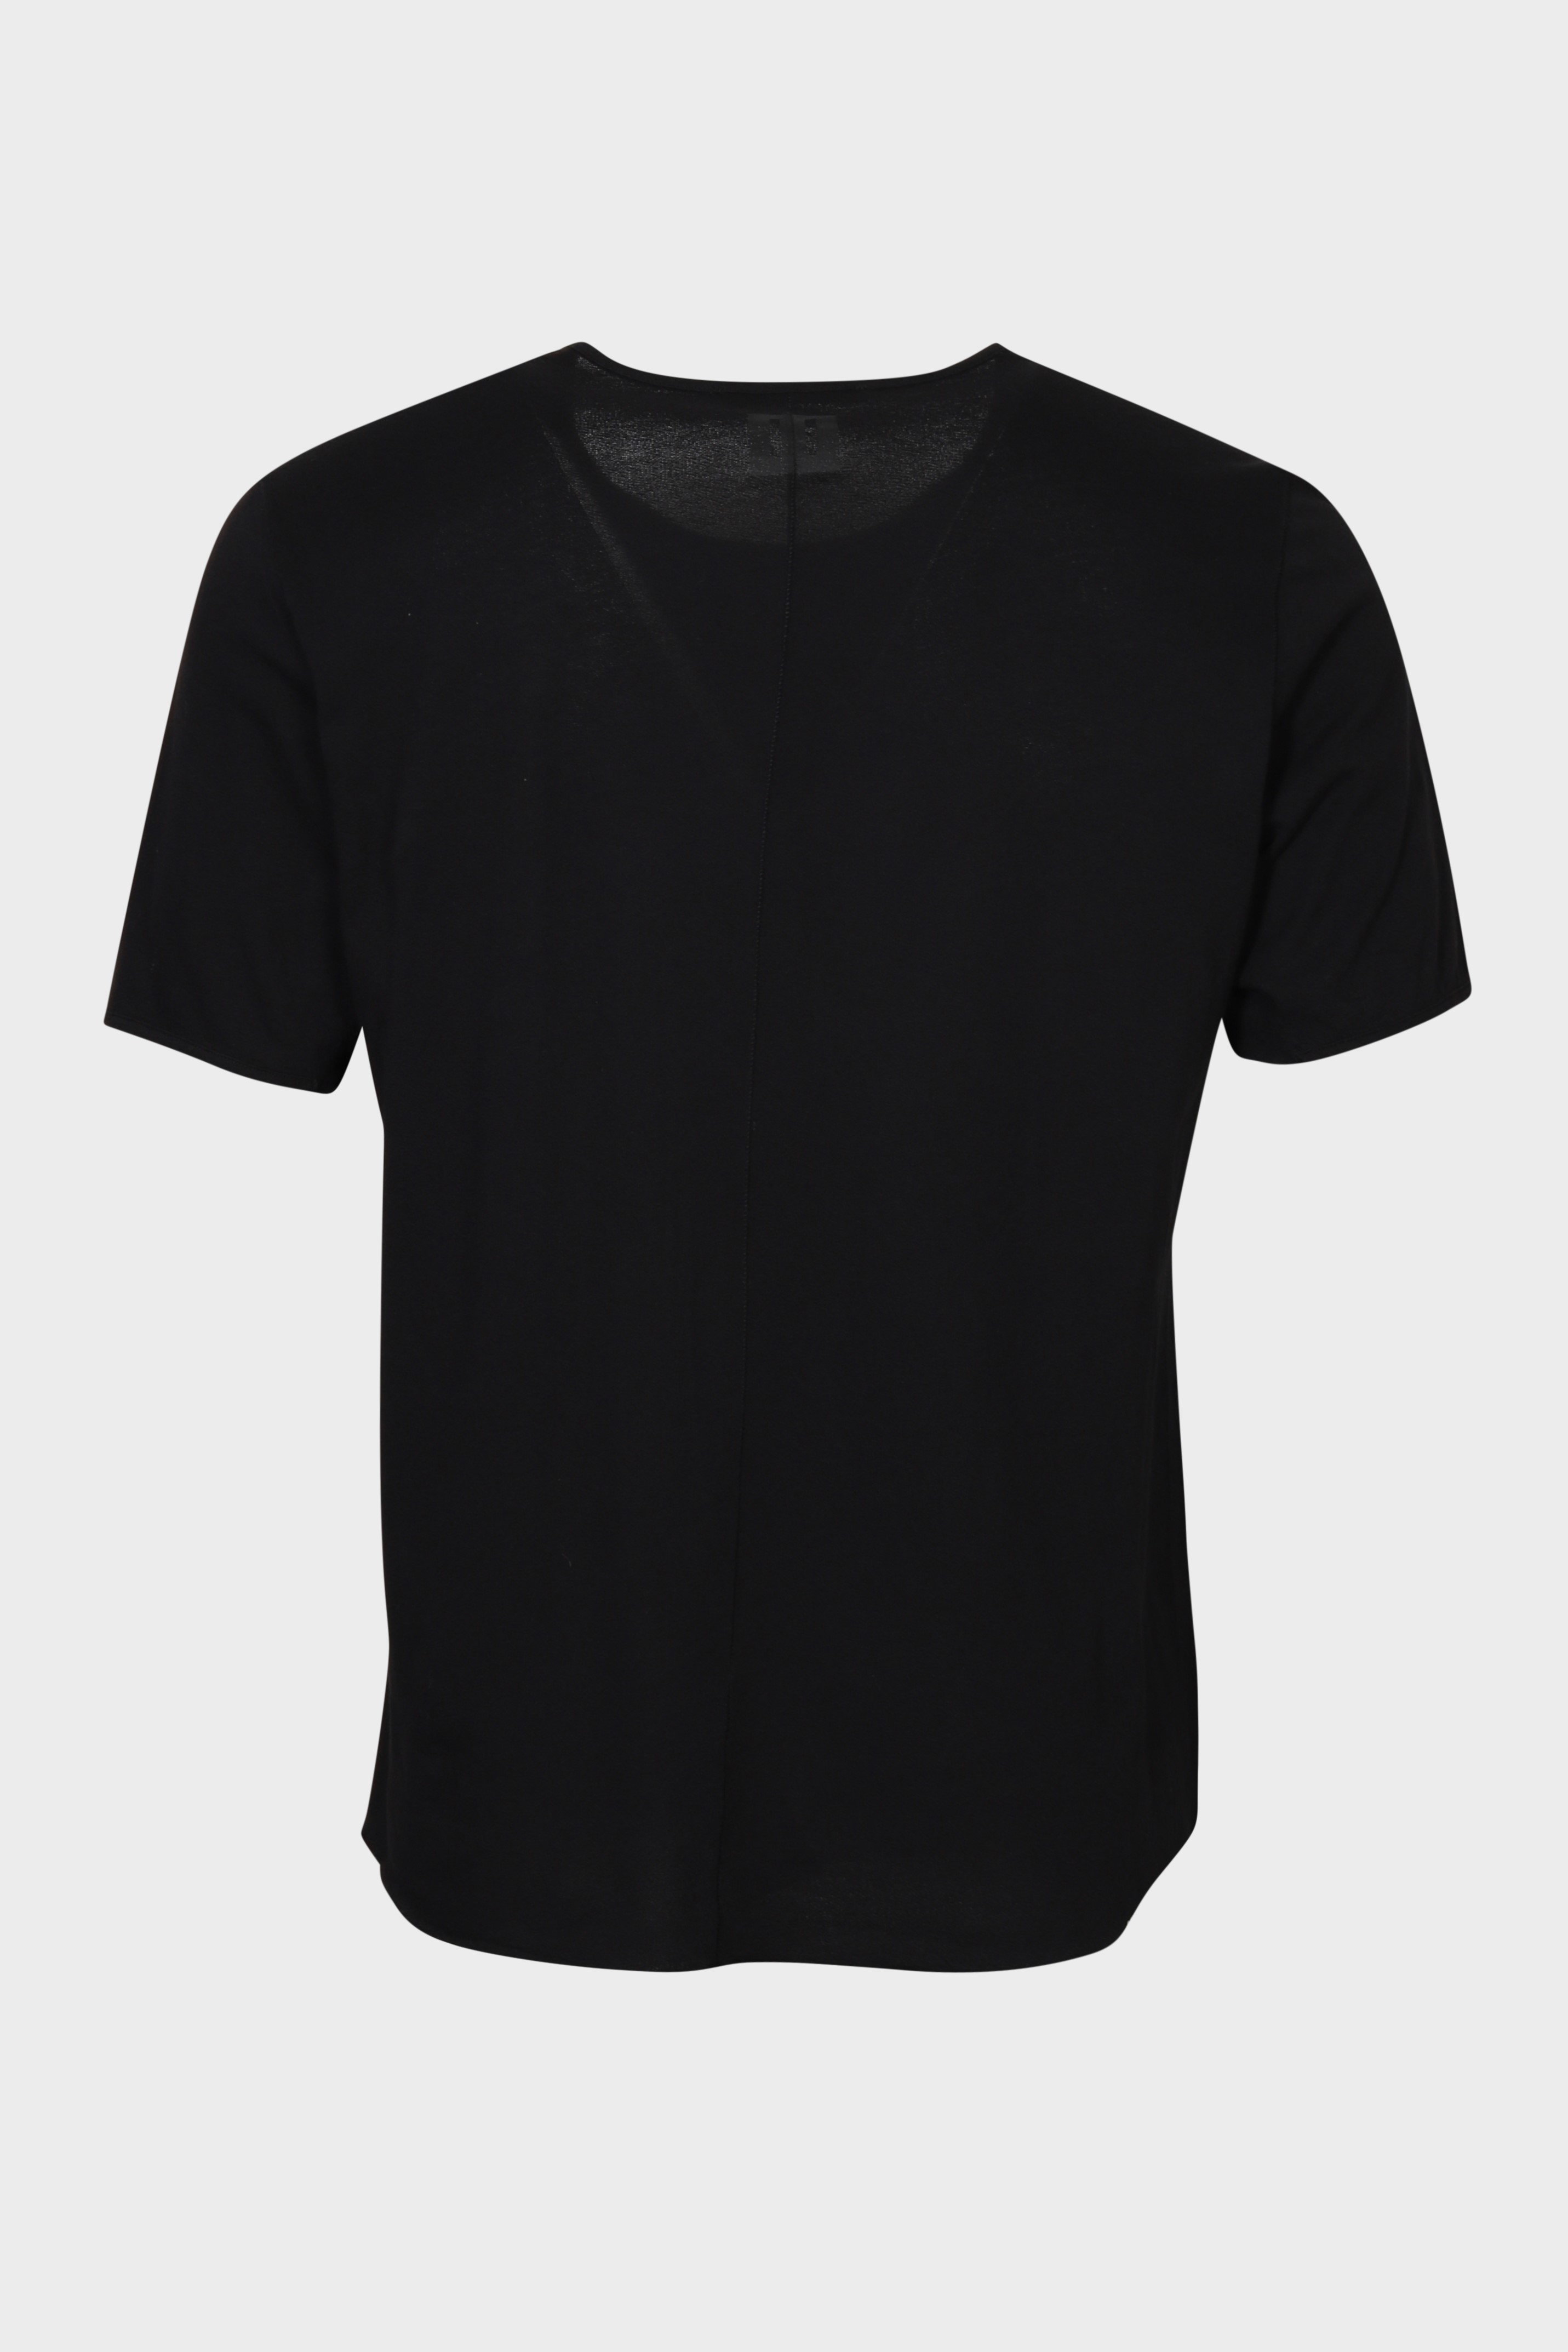 HANNES ROETHER T-Shirt in Black 2XL